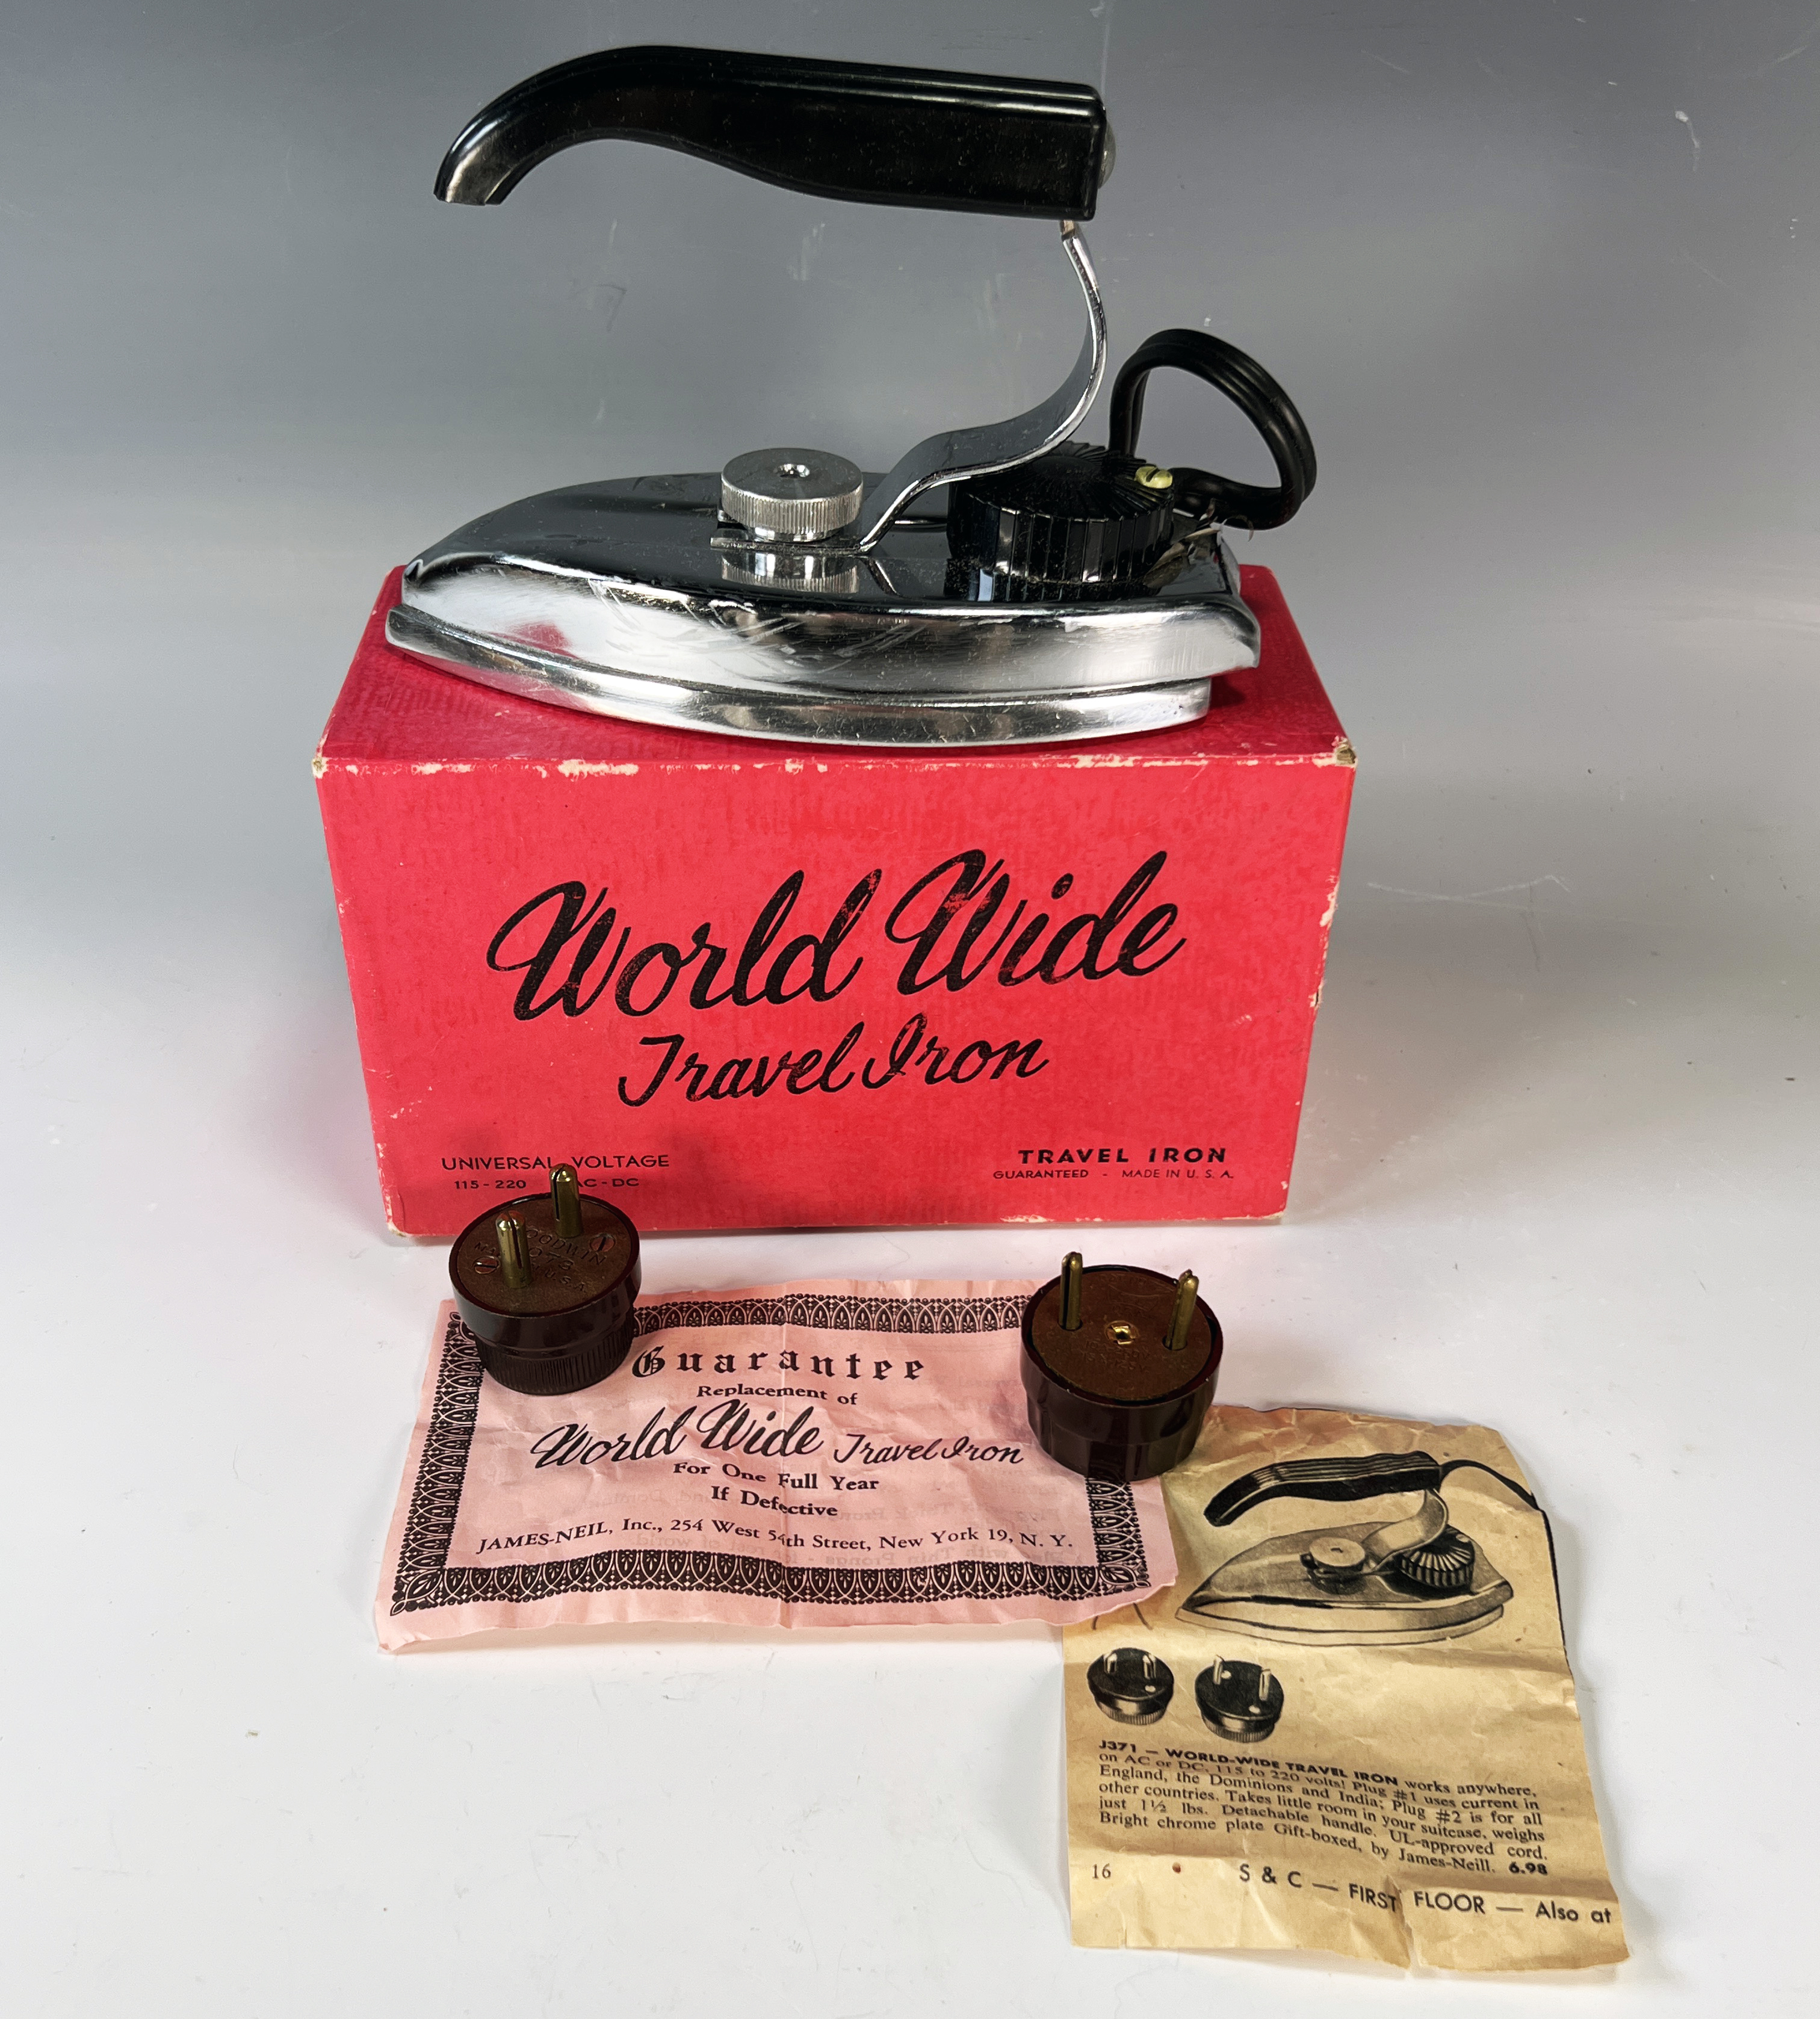 Vintage World Wide Travel Iron In Box image 1